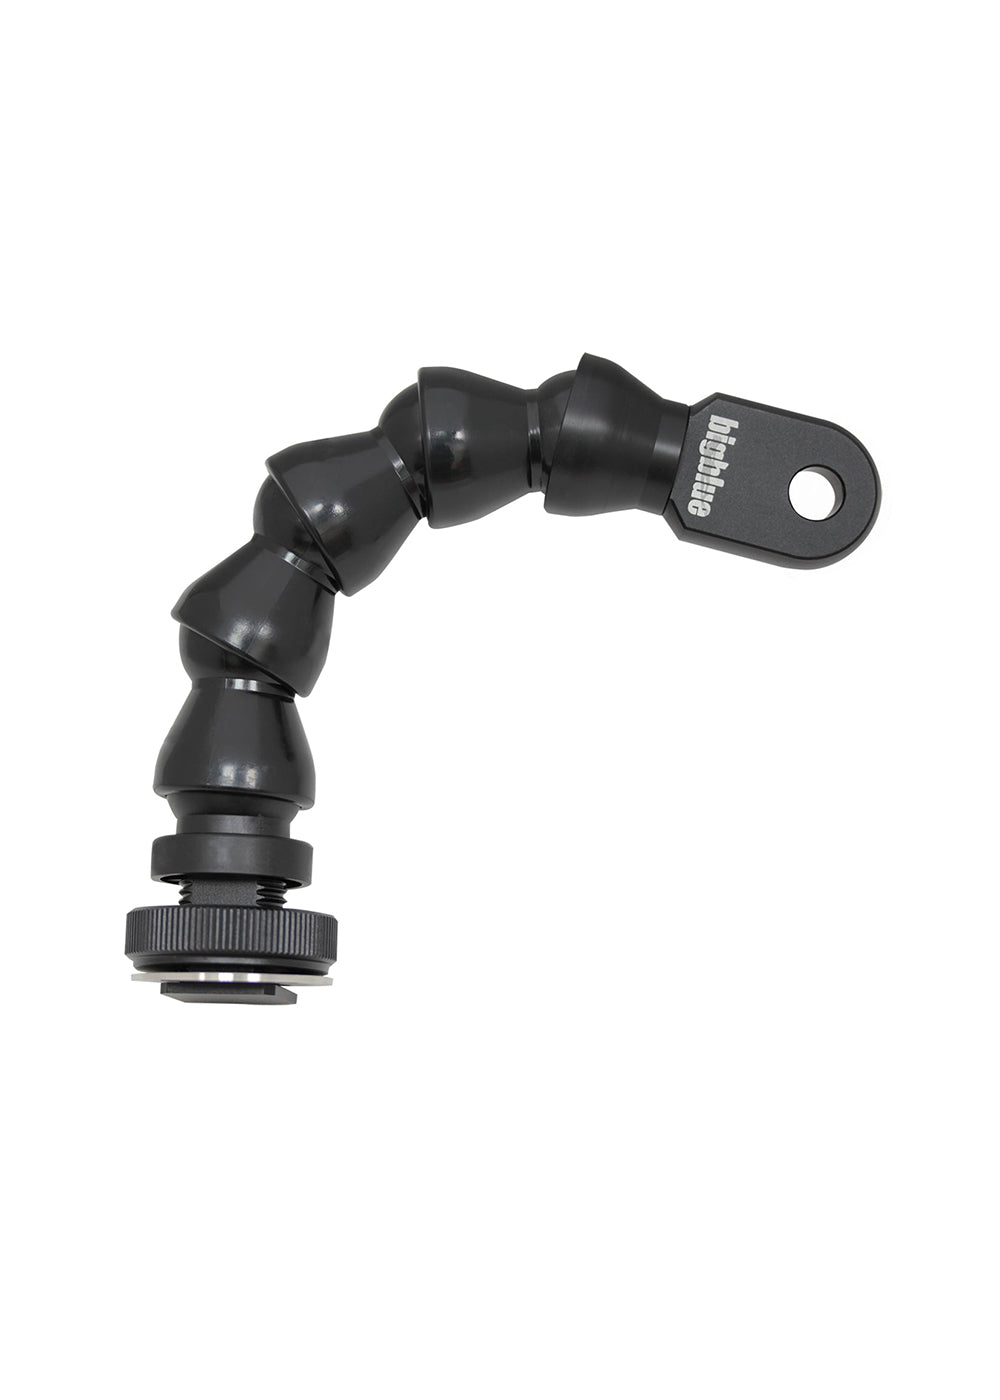 6" Flexi Arm with Hot Shoe YS Adapter